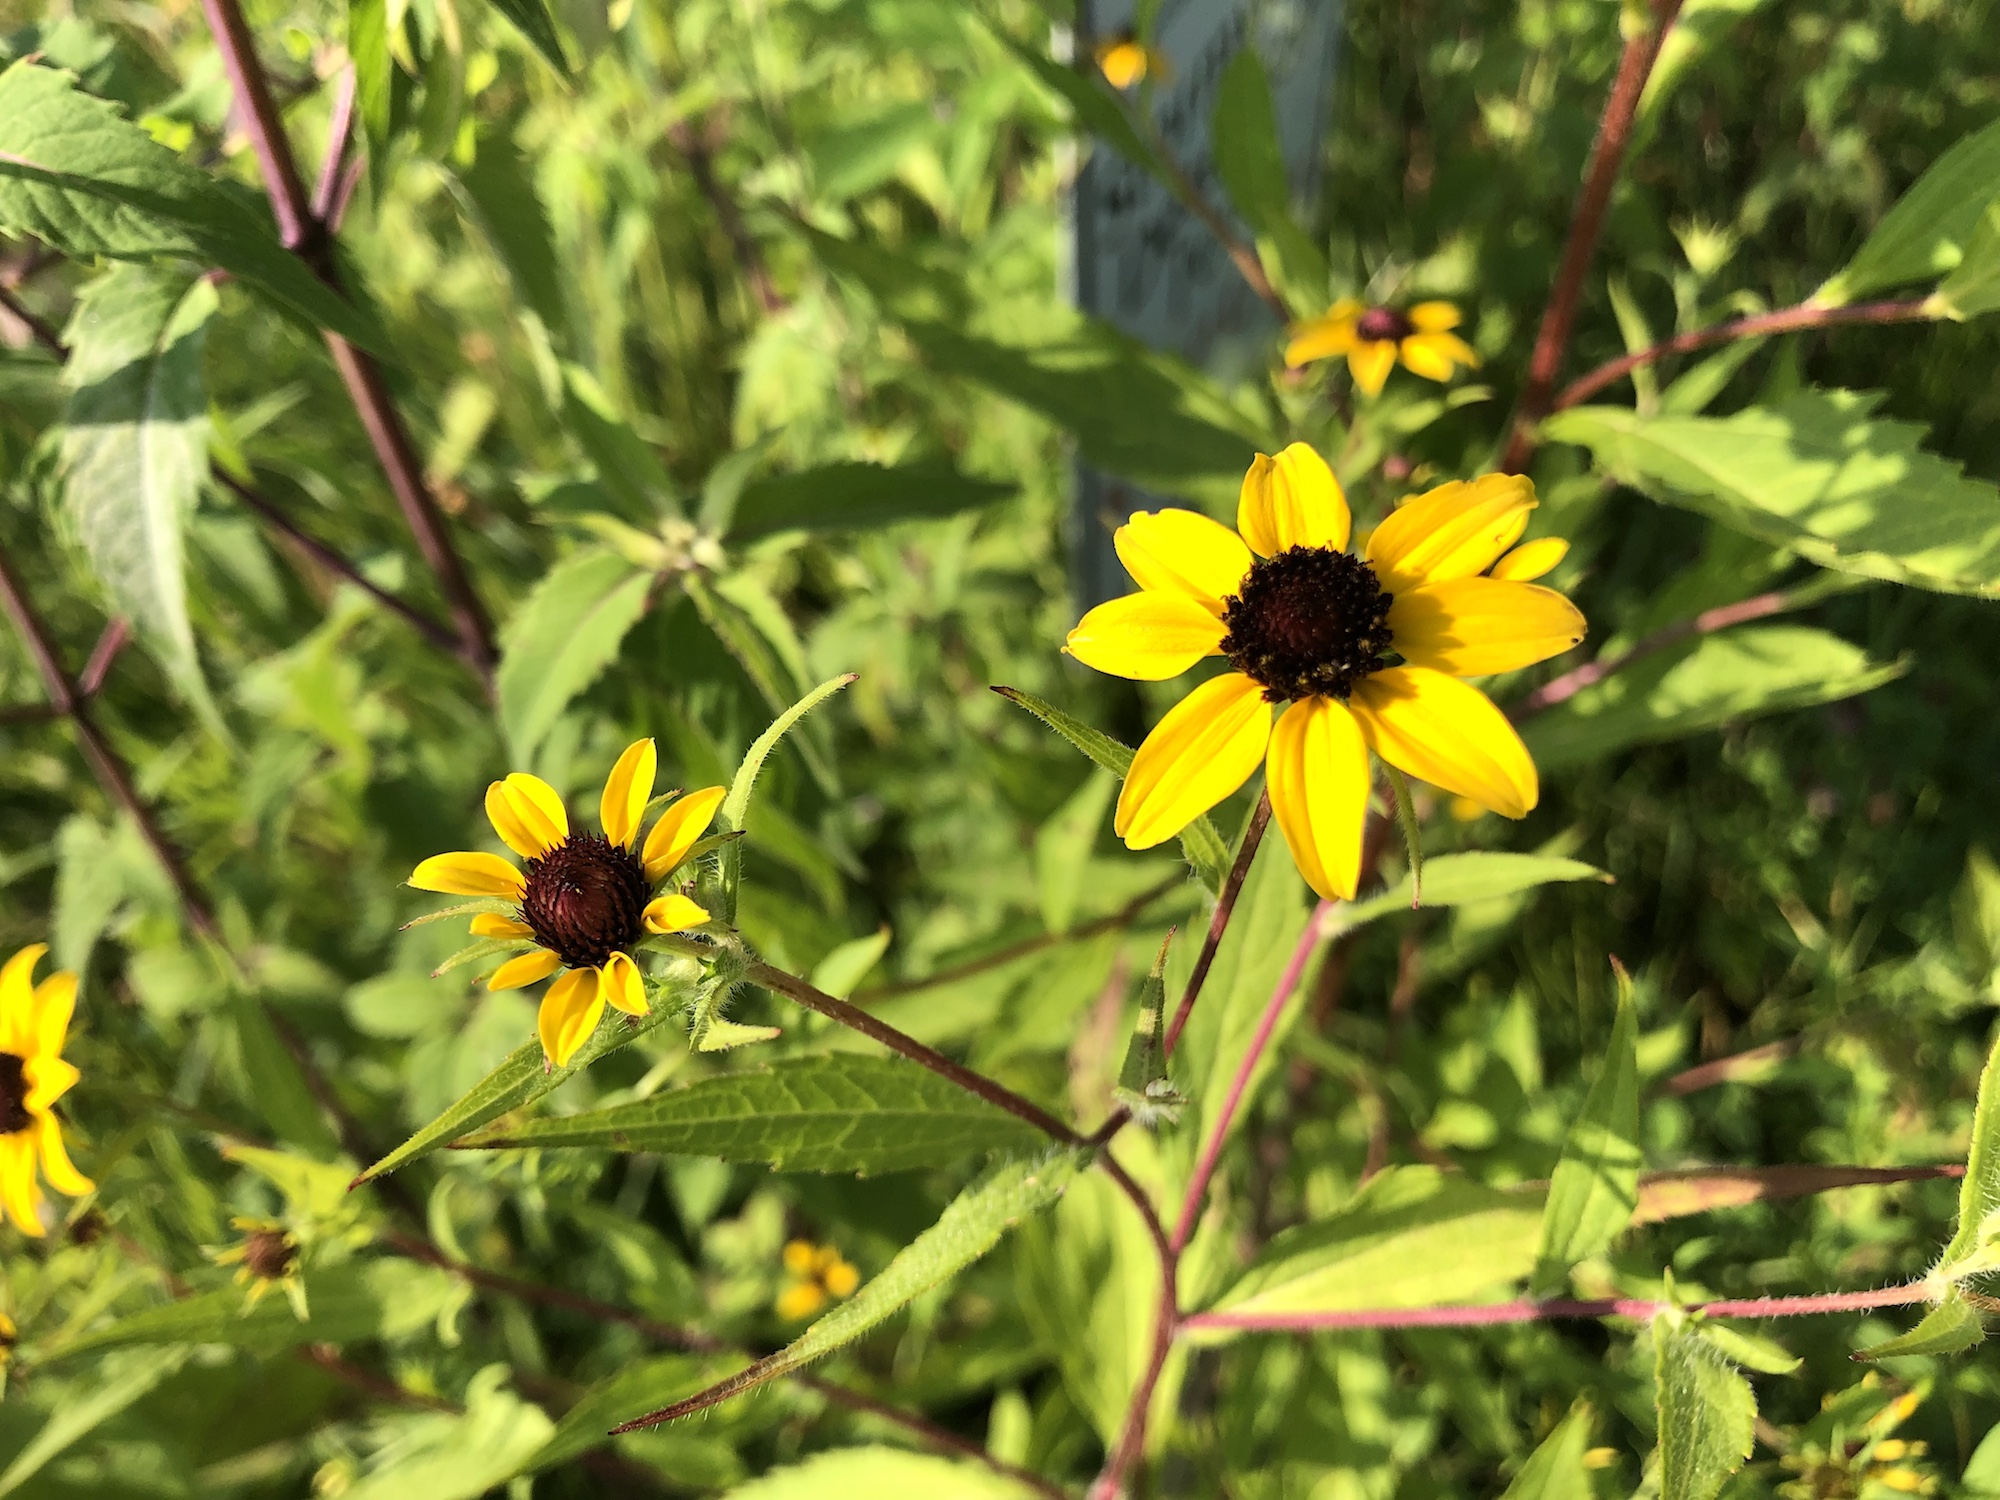 Brown-eyed Susan on banks of retaining pond in Madison, Wisconsin on July 27, 2019.